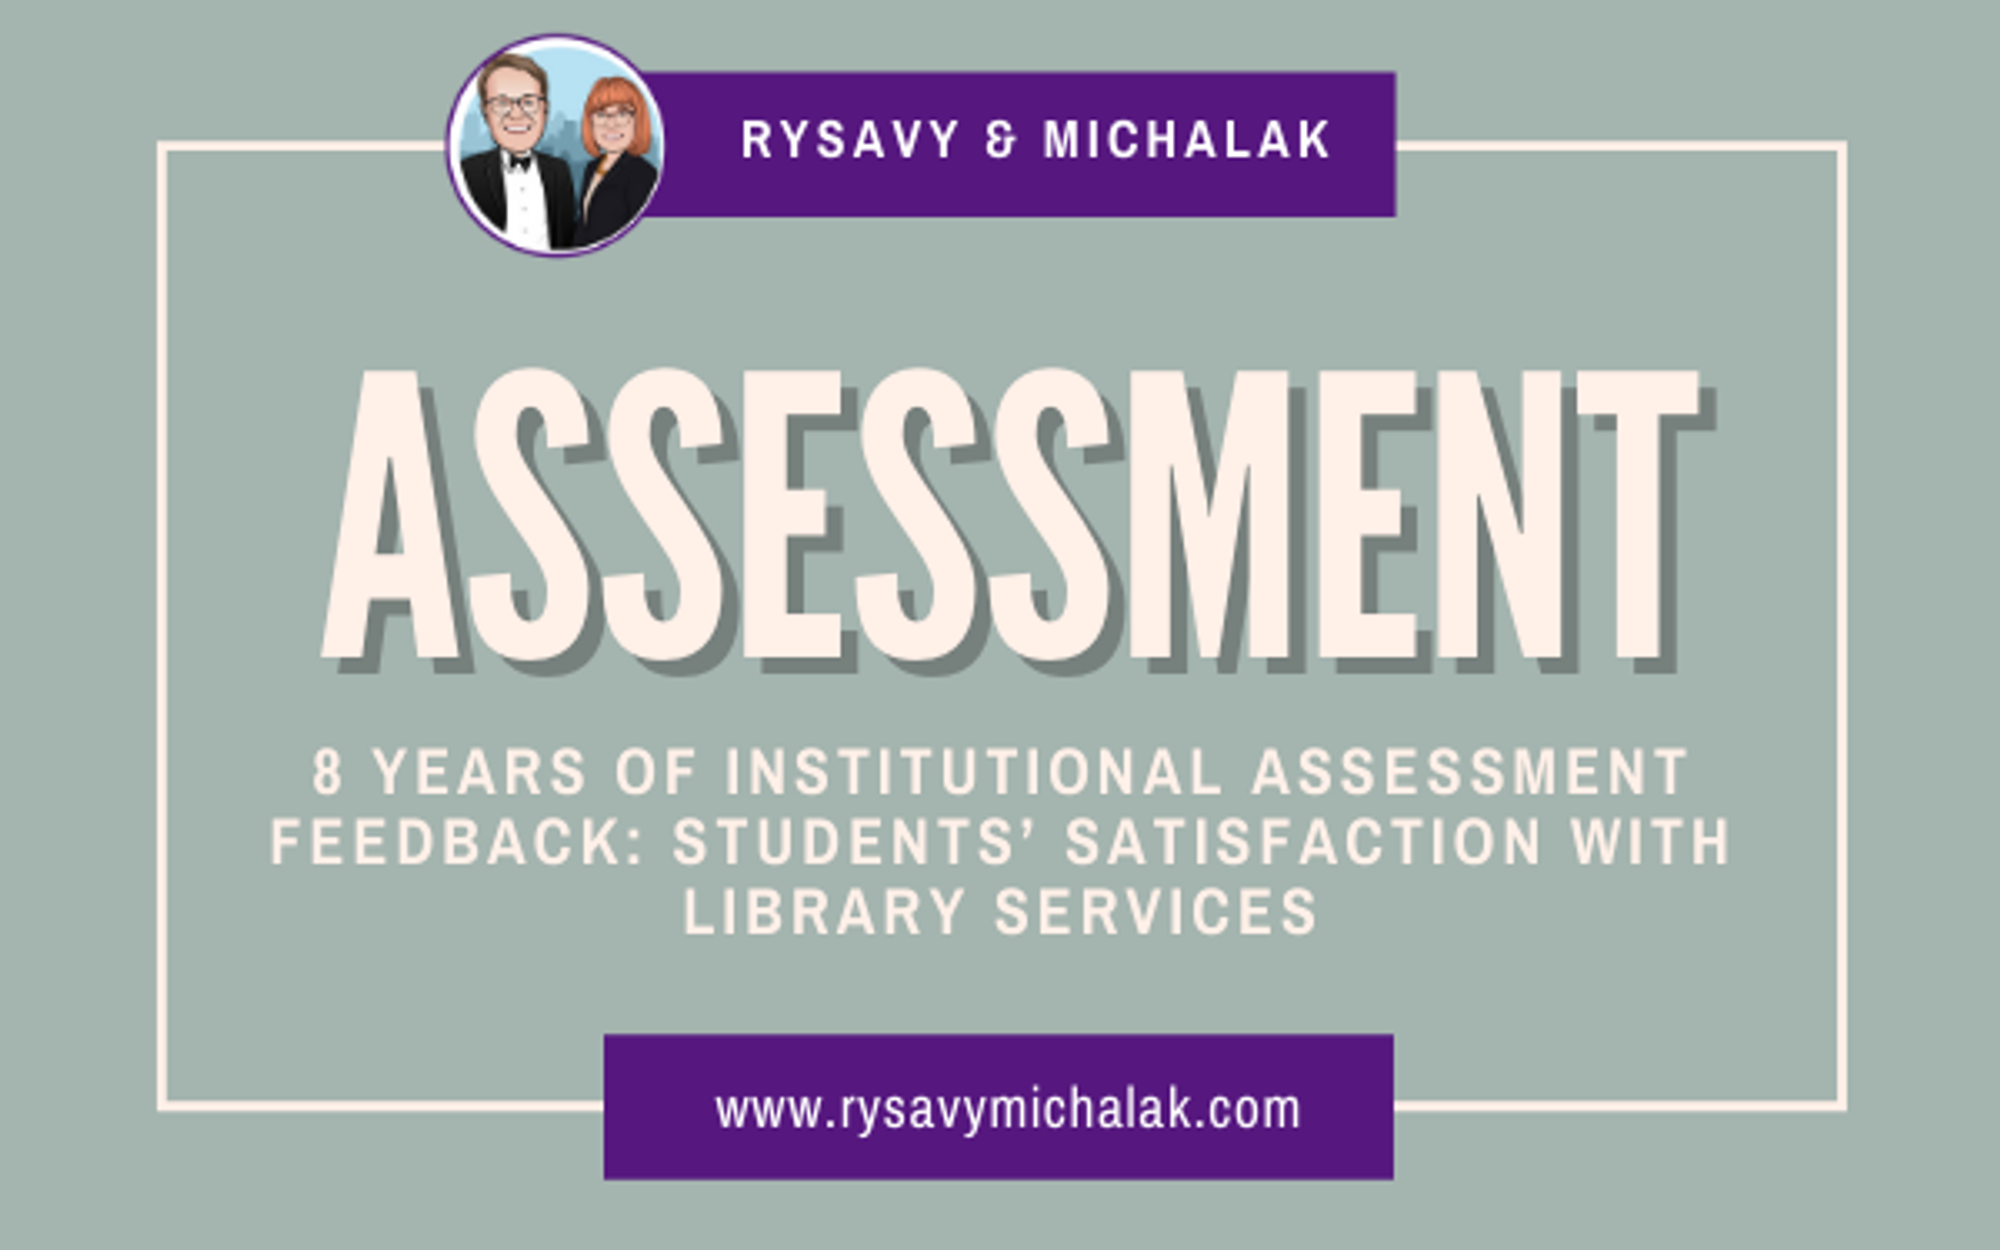 8 Years of institutional assessment feedback: students’ satisfaction with library services